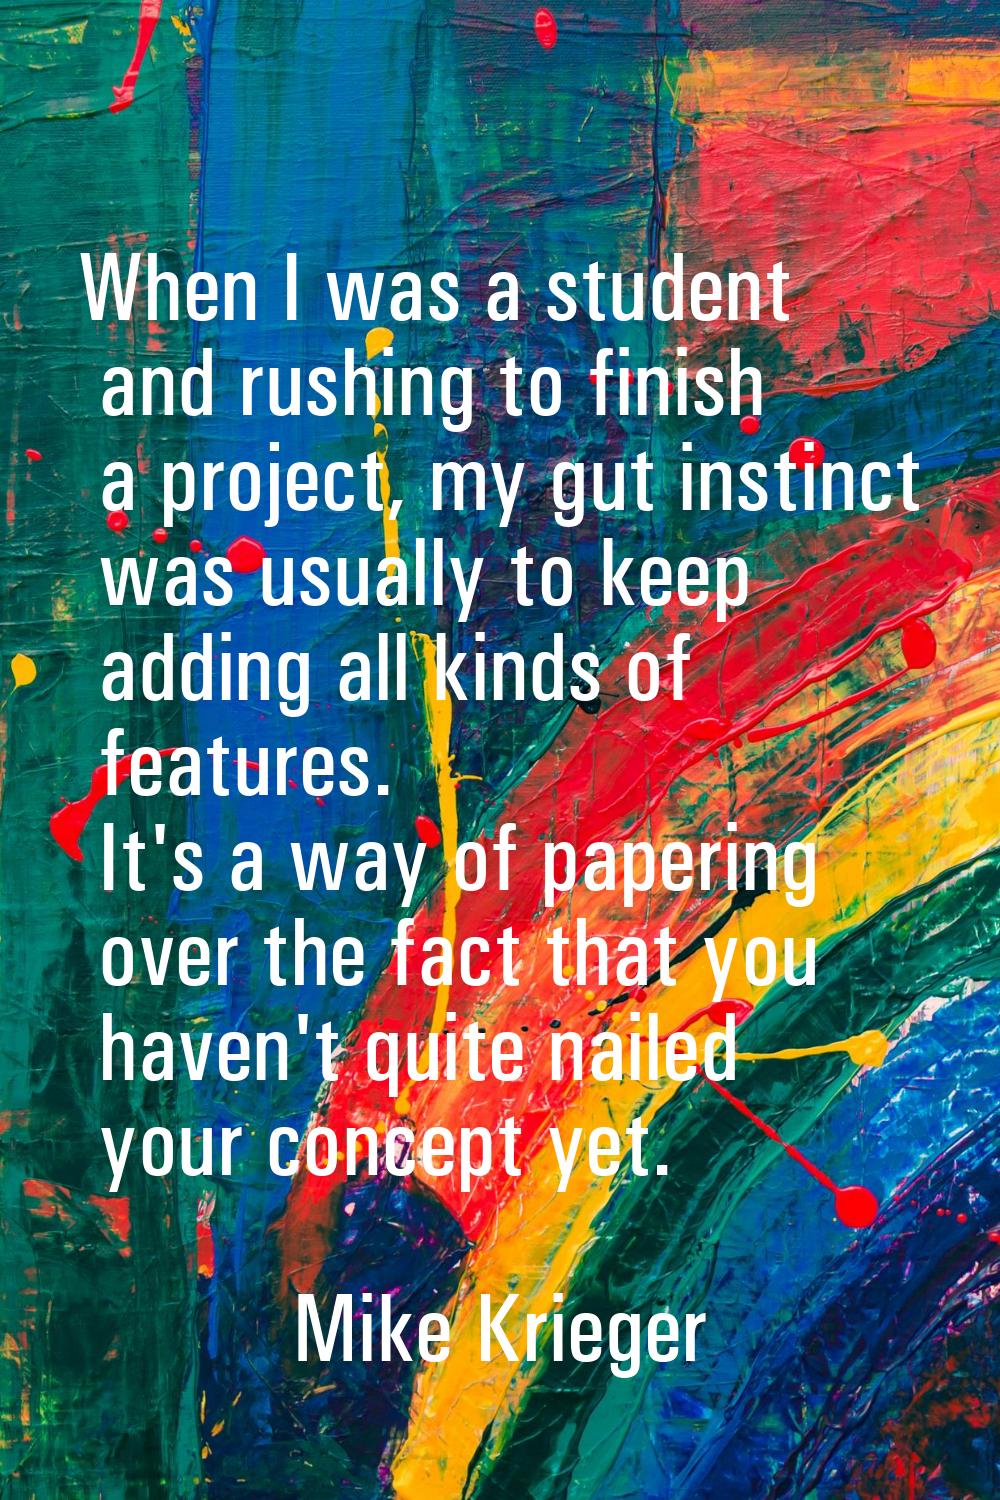 When I was a student and rushing to finish a project, my gut instinct was usually to keep adding al